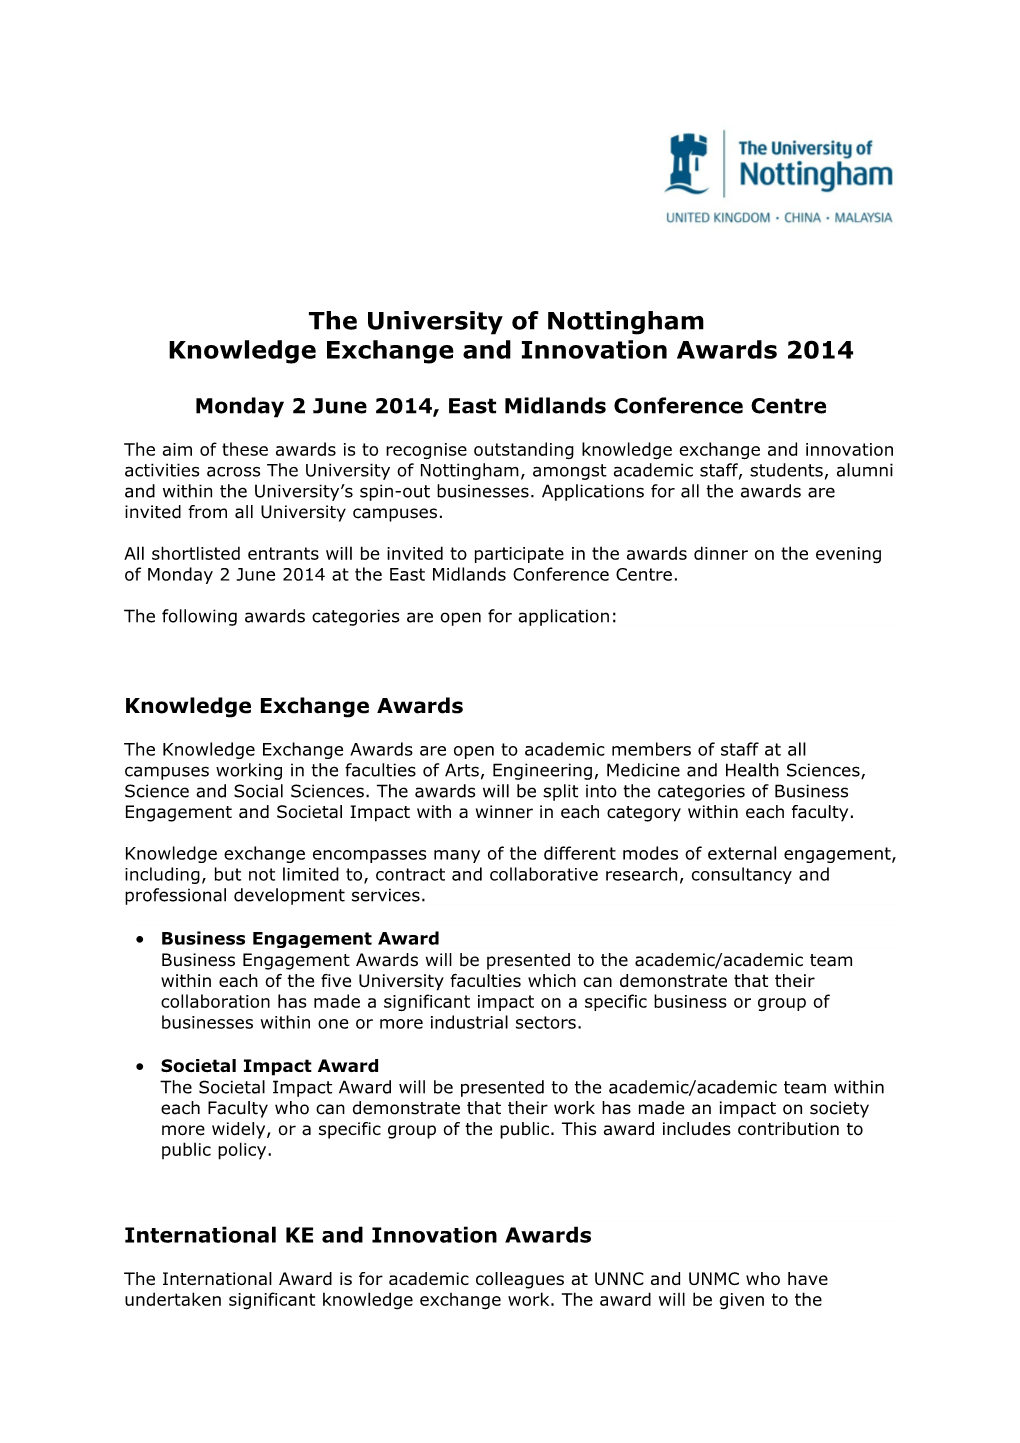 Knowledge Exchange and Innovation Awards 2014